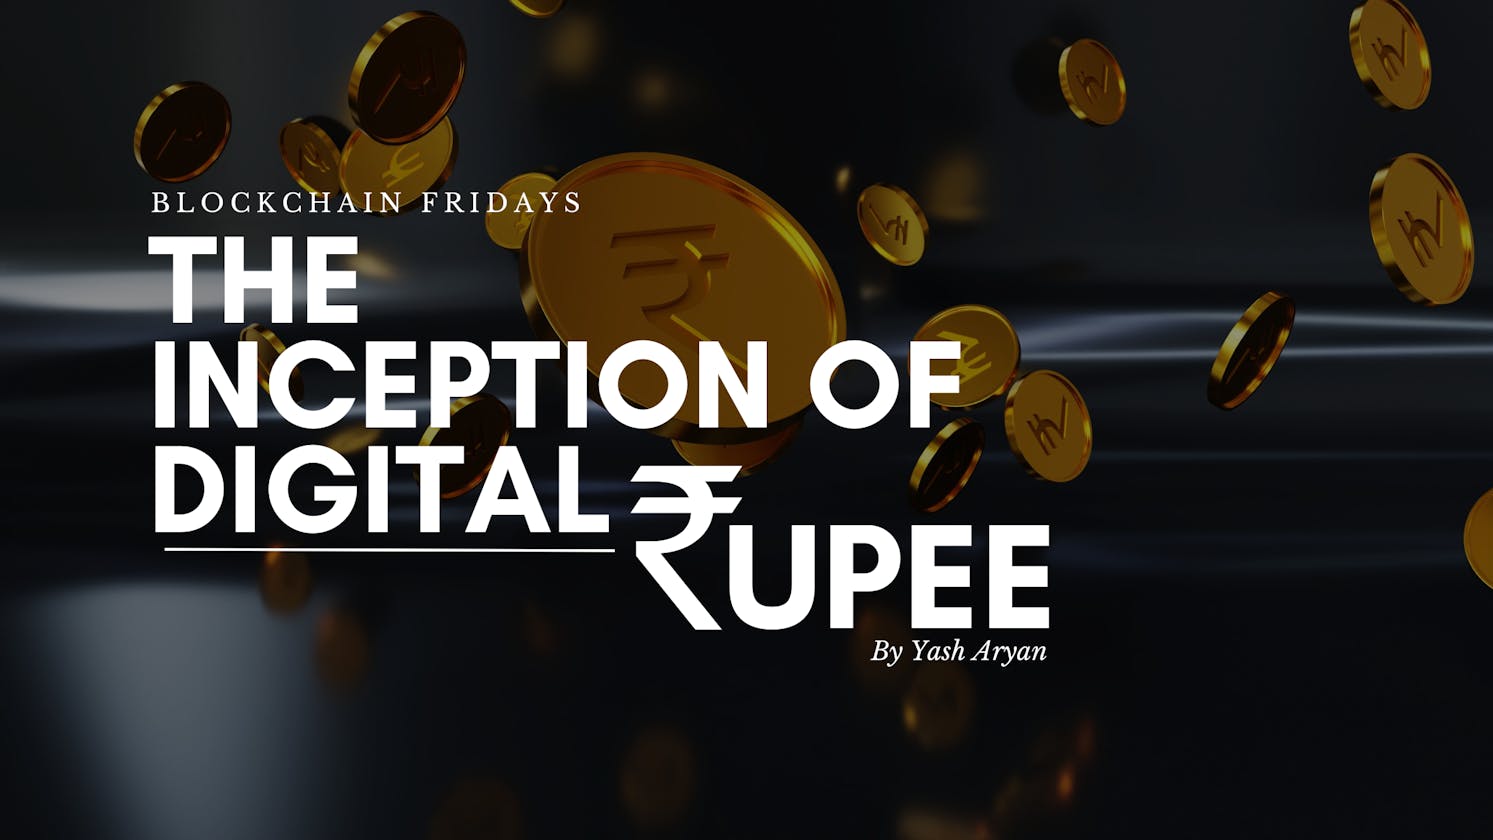 The Inception of Digital Rupee